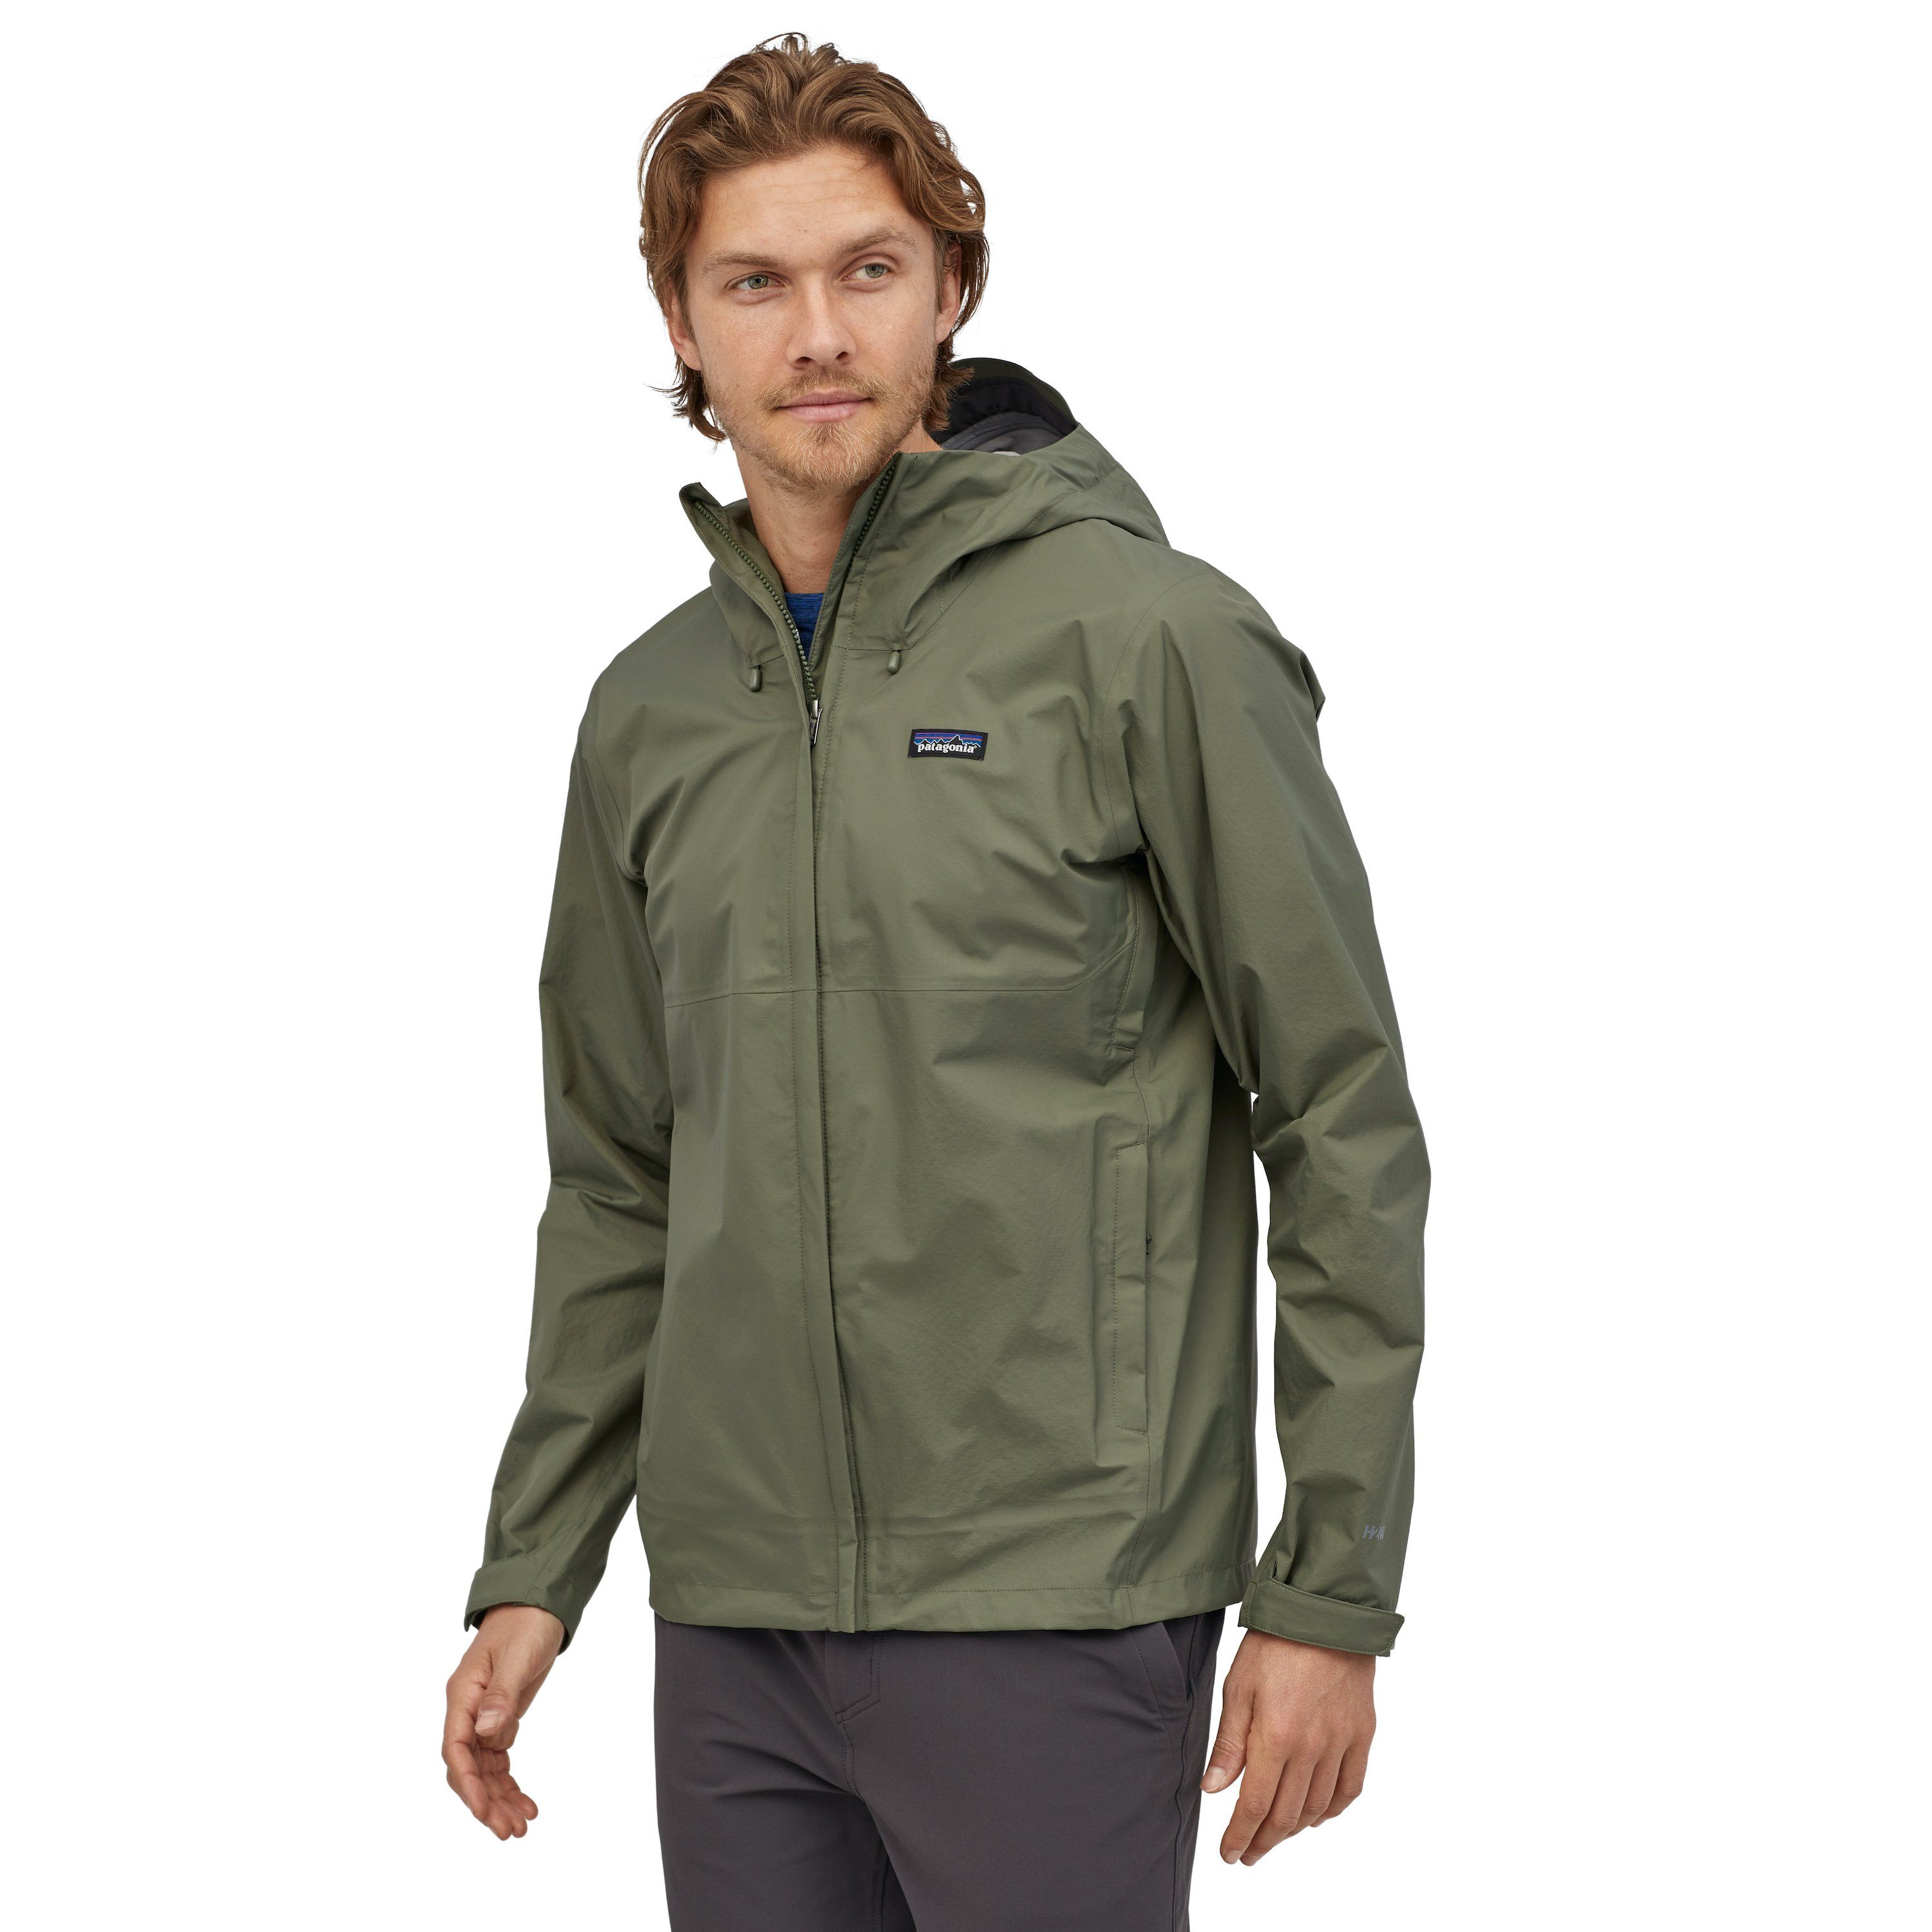 Patagonia Men's Torrentshell 3L Jacket - 100% Recycled Nylon, Industrial Green / S